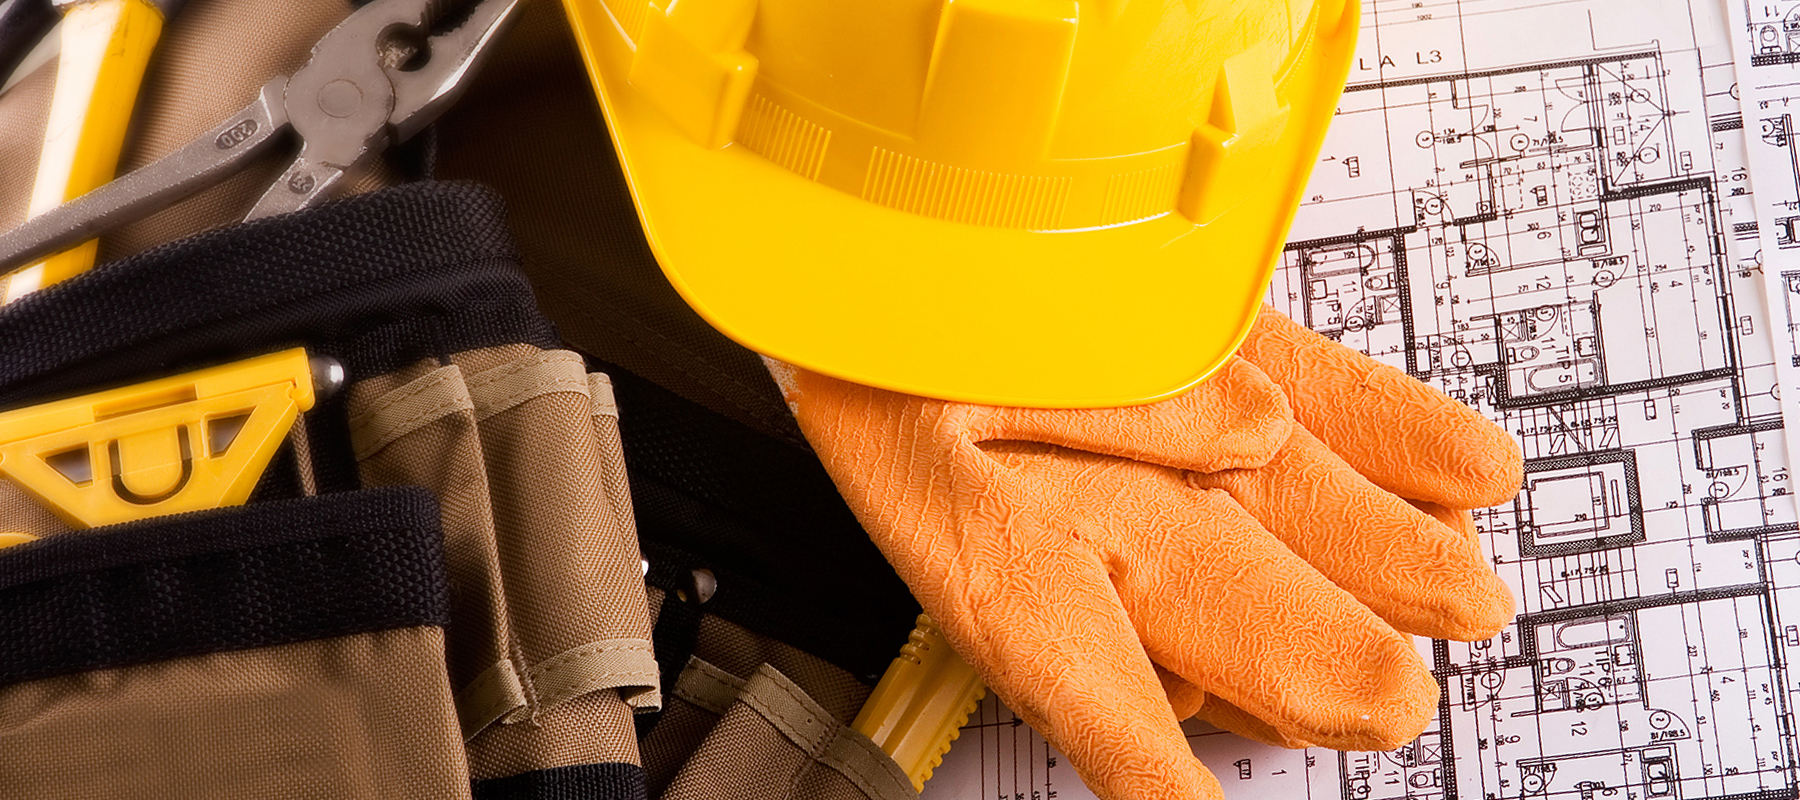 yellow hard hat, work clothes and blue prints